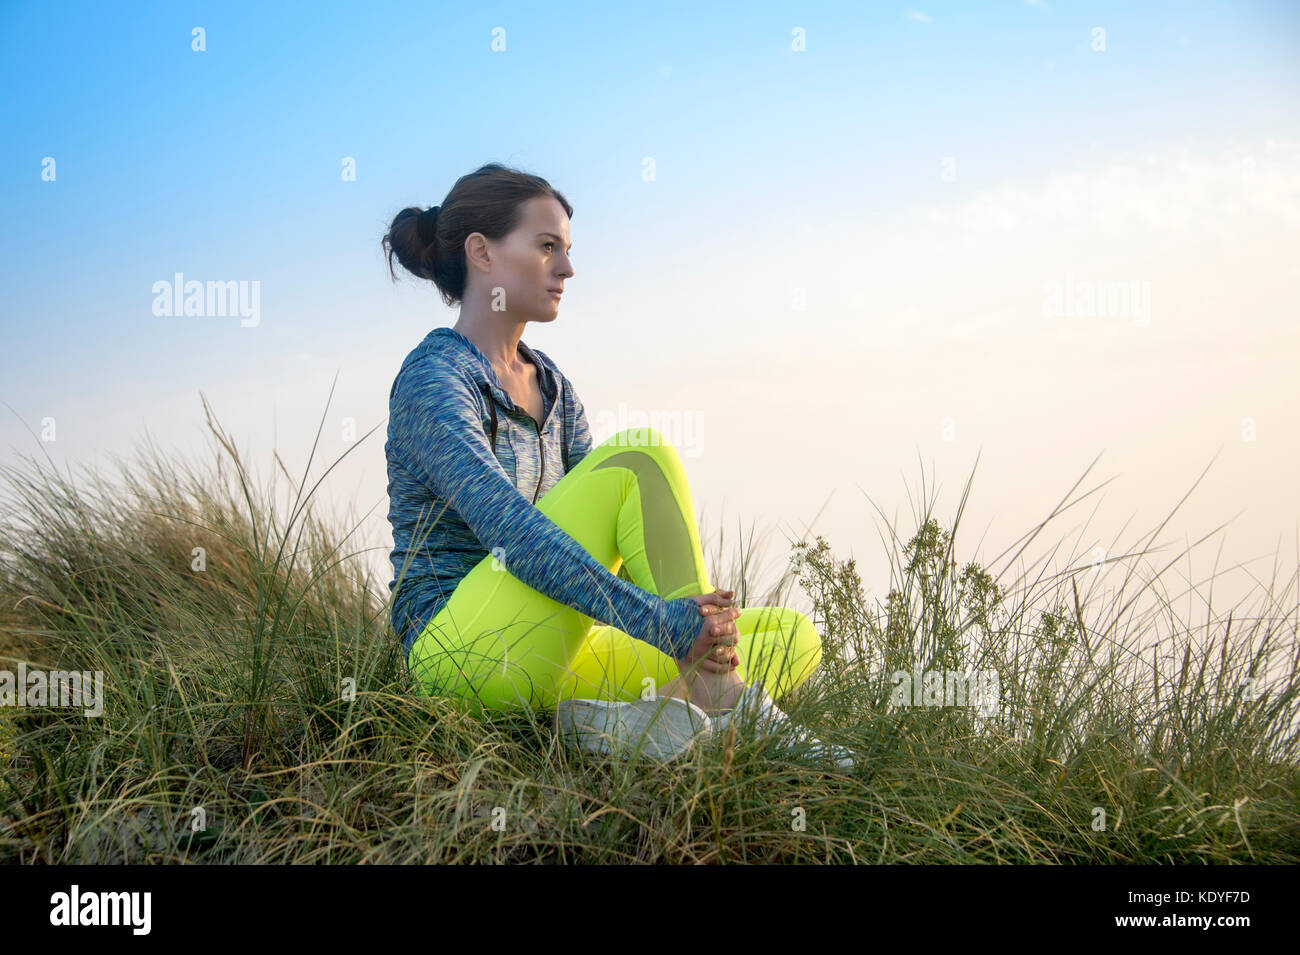 woman sitting down resting after exercising, running at sunrise/sunset Stock Photo